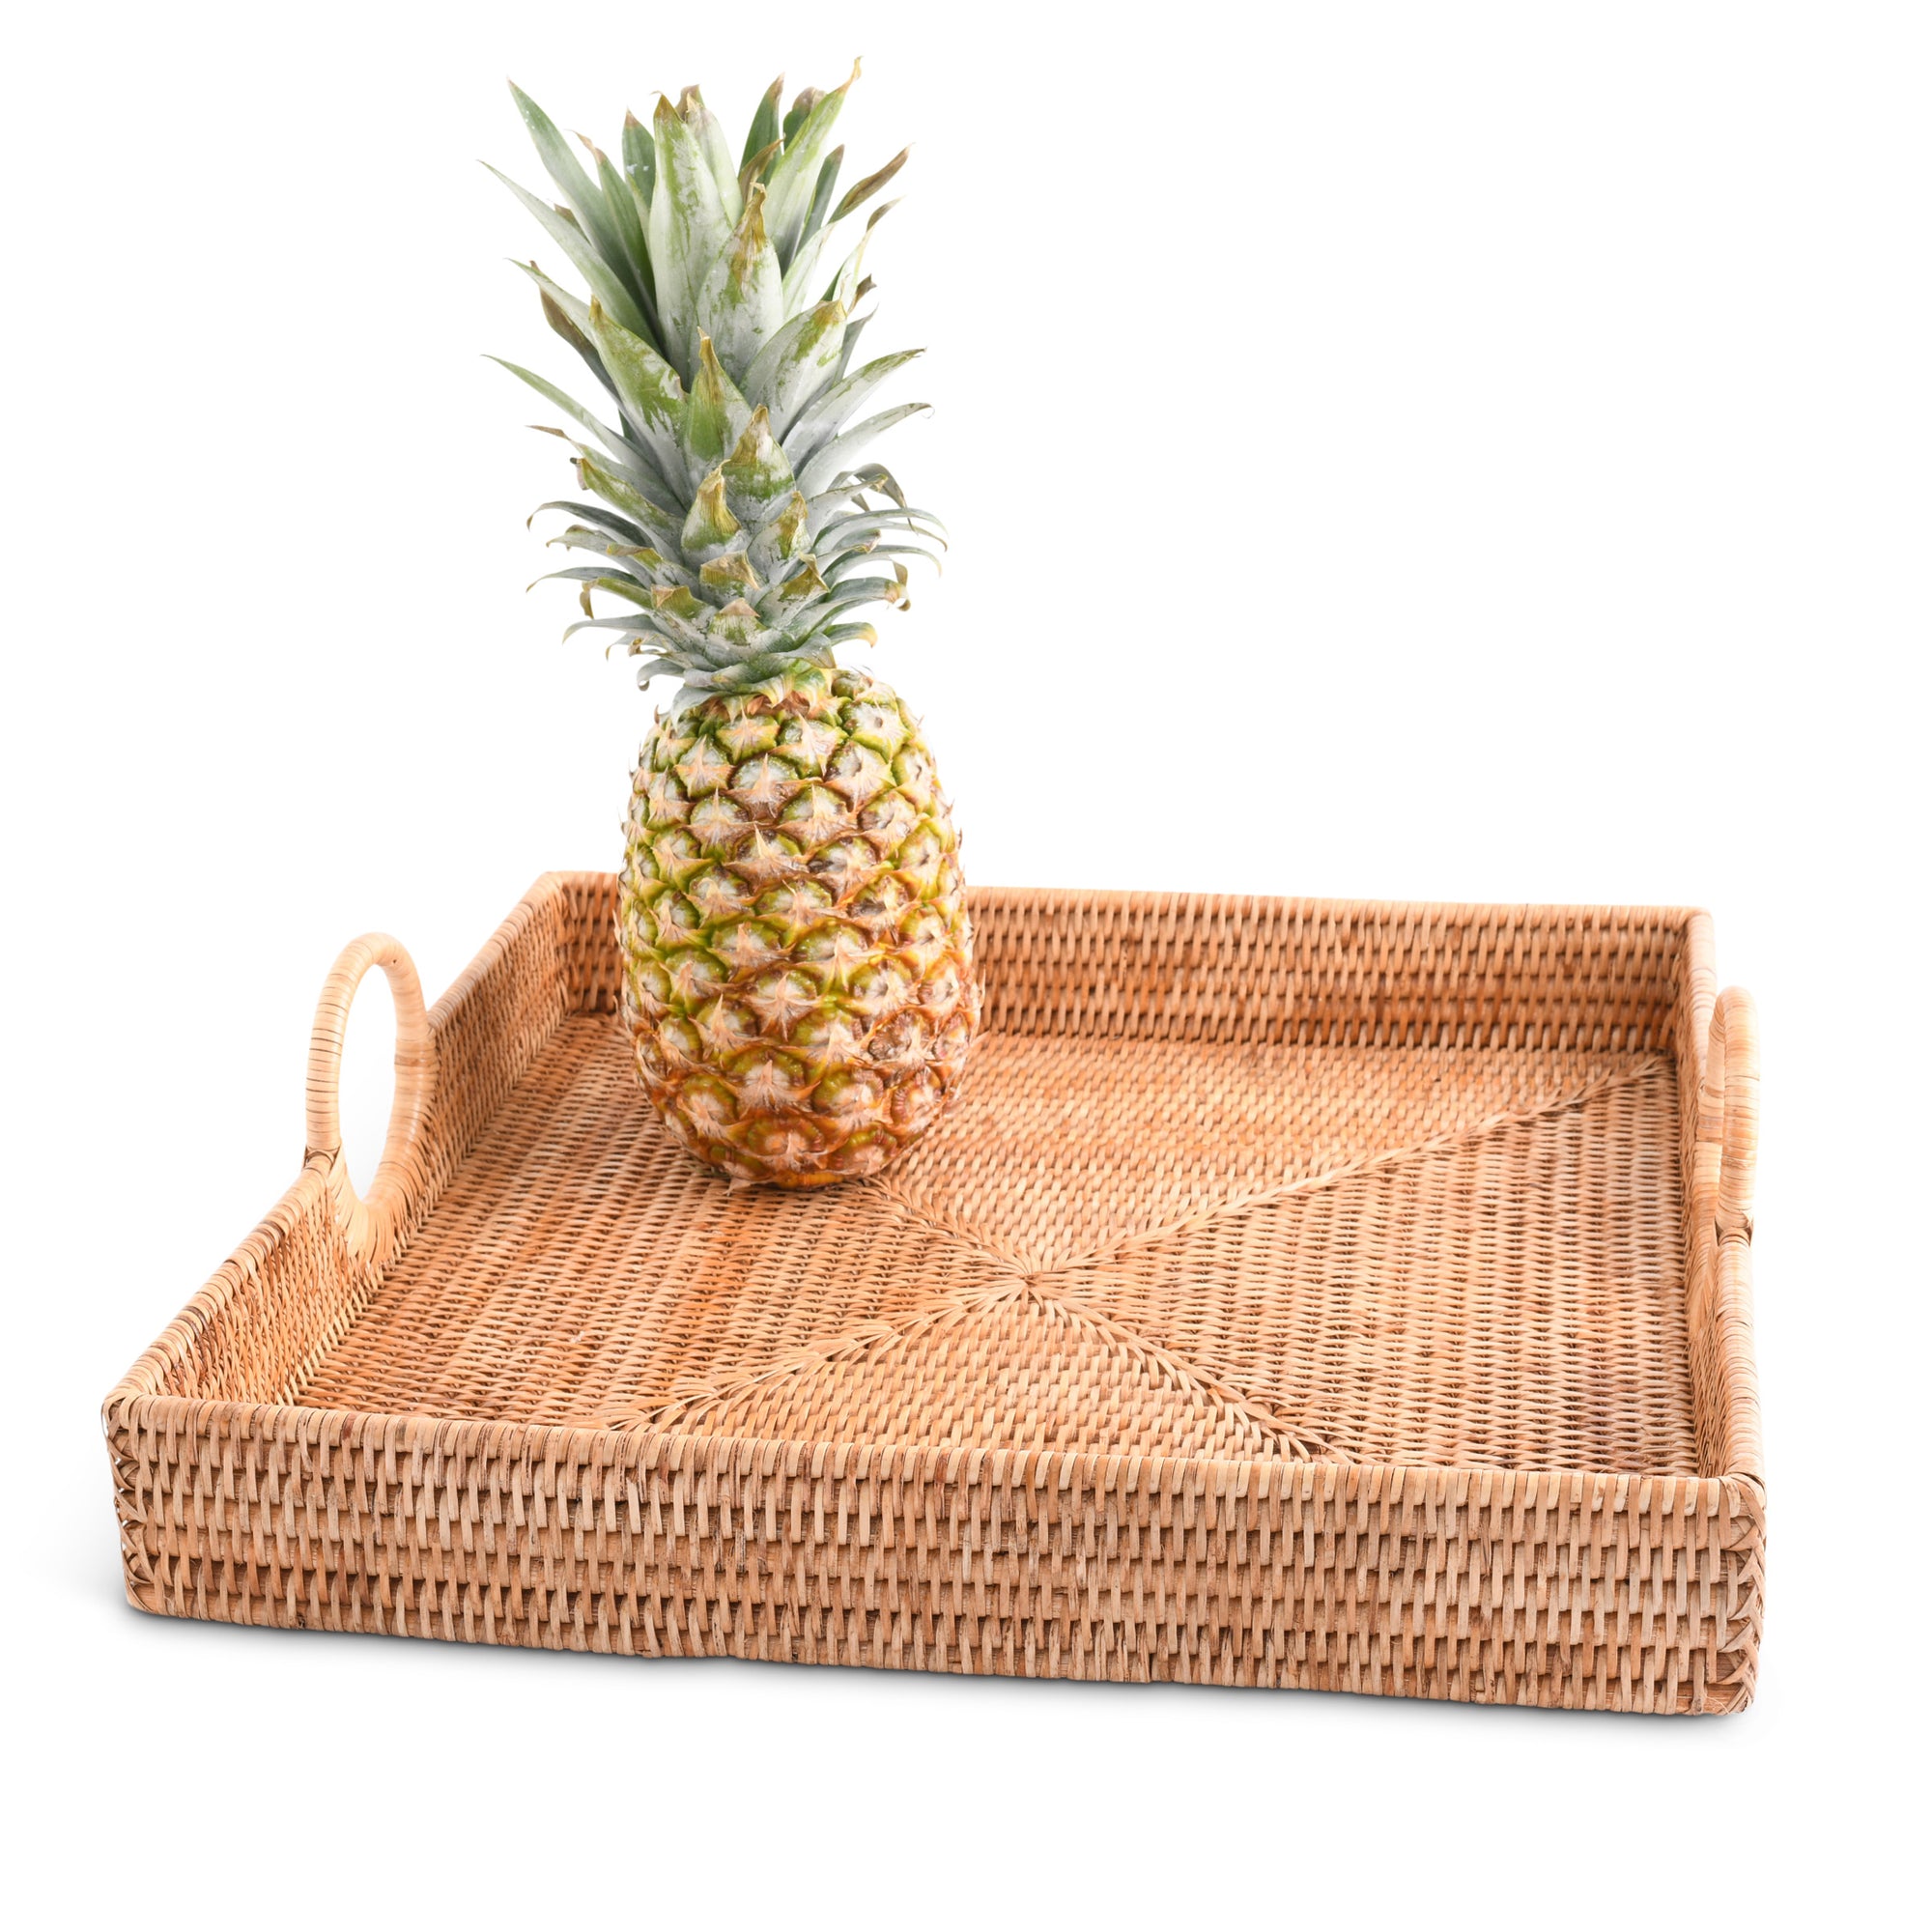 Vagabond House Hand Woven Wicker Rattan Large Square Tray Product Image